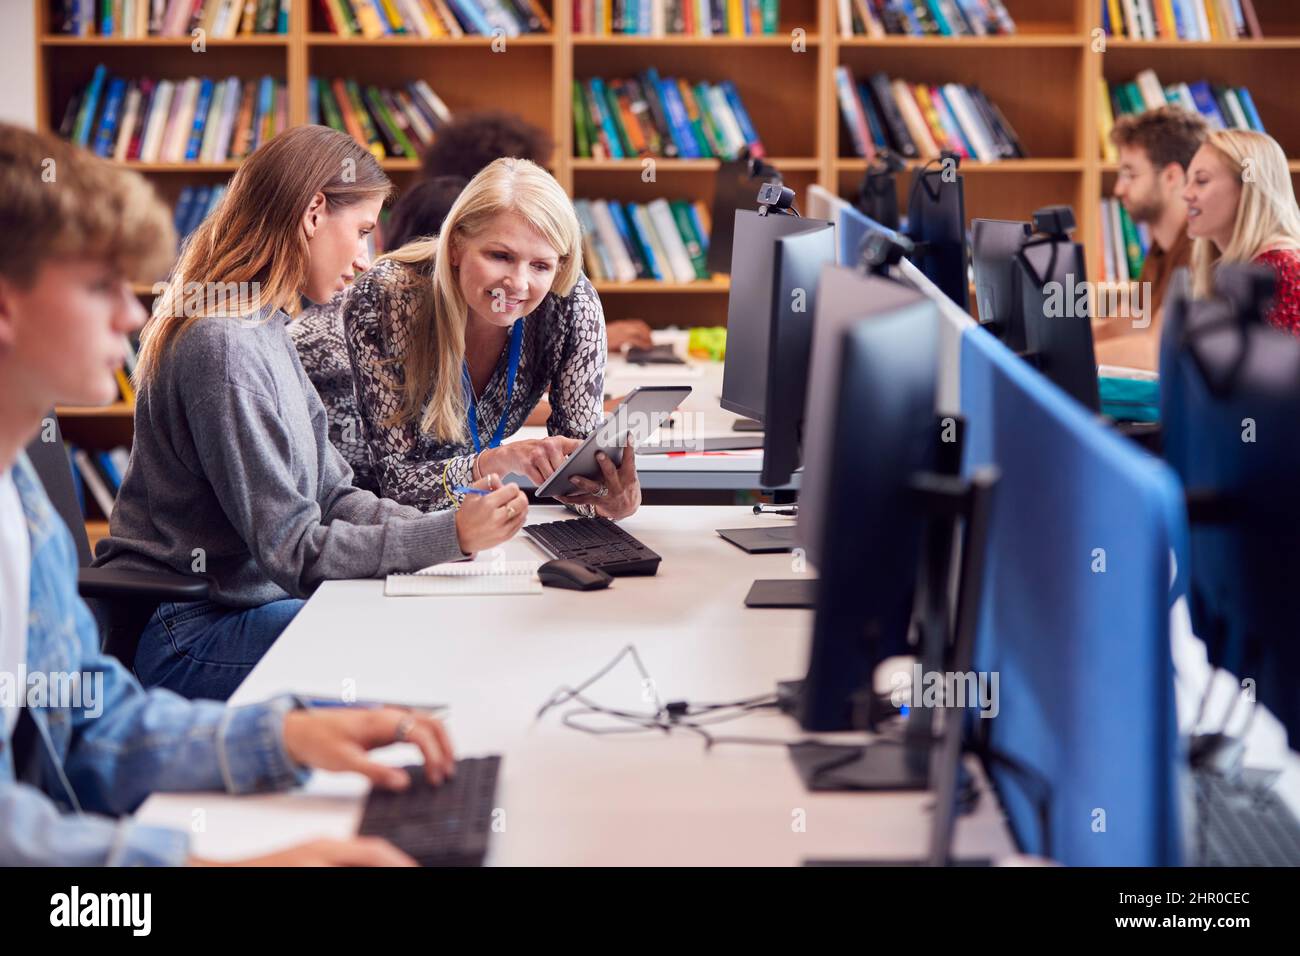 Female University Or College Student Working At Computer In Library Being Helped By Tutor Stock Photo